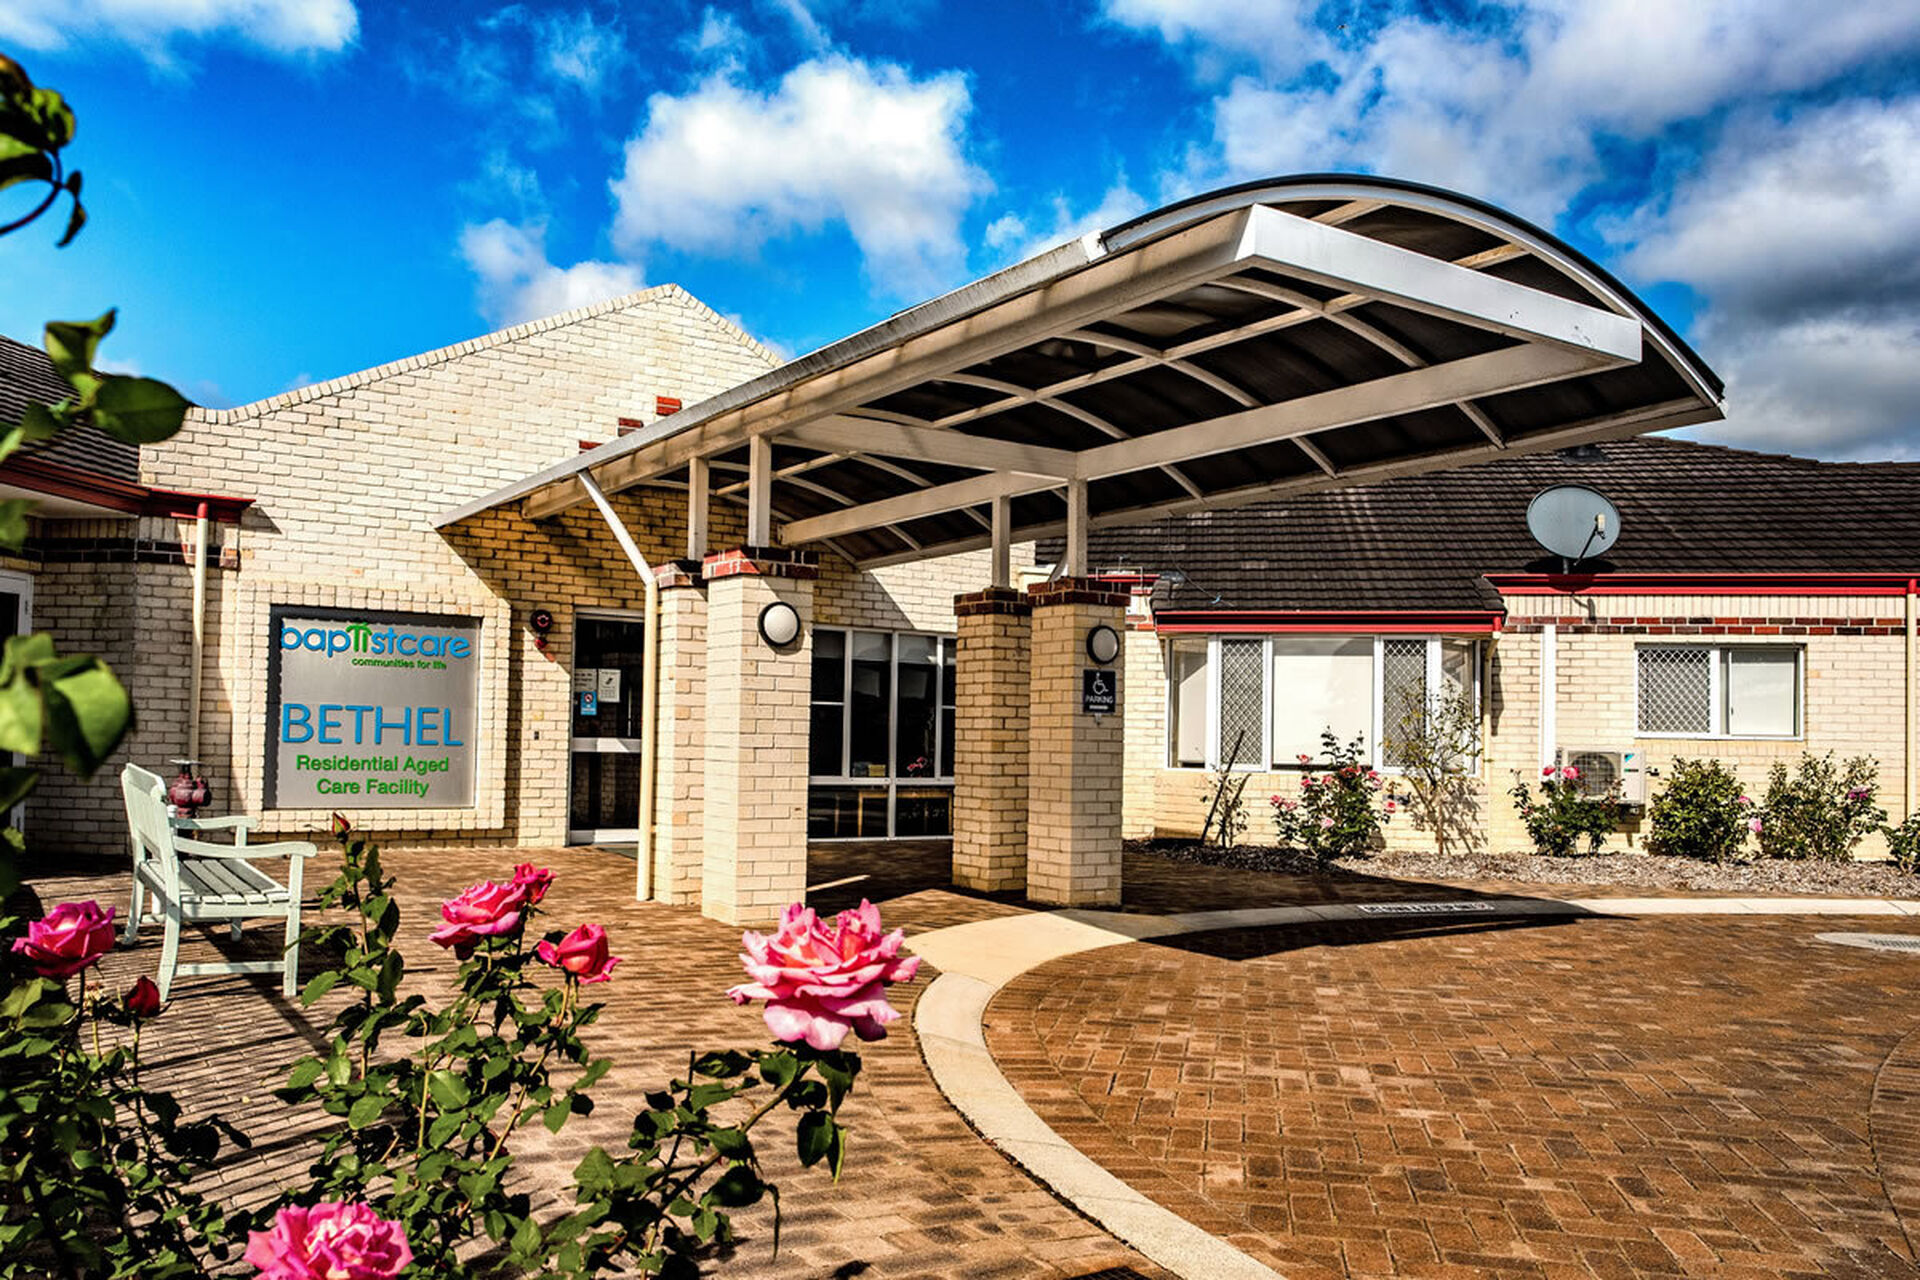 streetscape of baptistcare bethel aged care home in albany wa for nursing home residents and dementia care